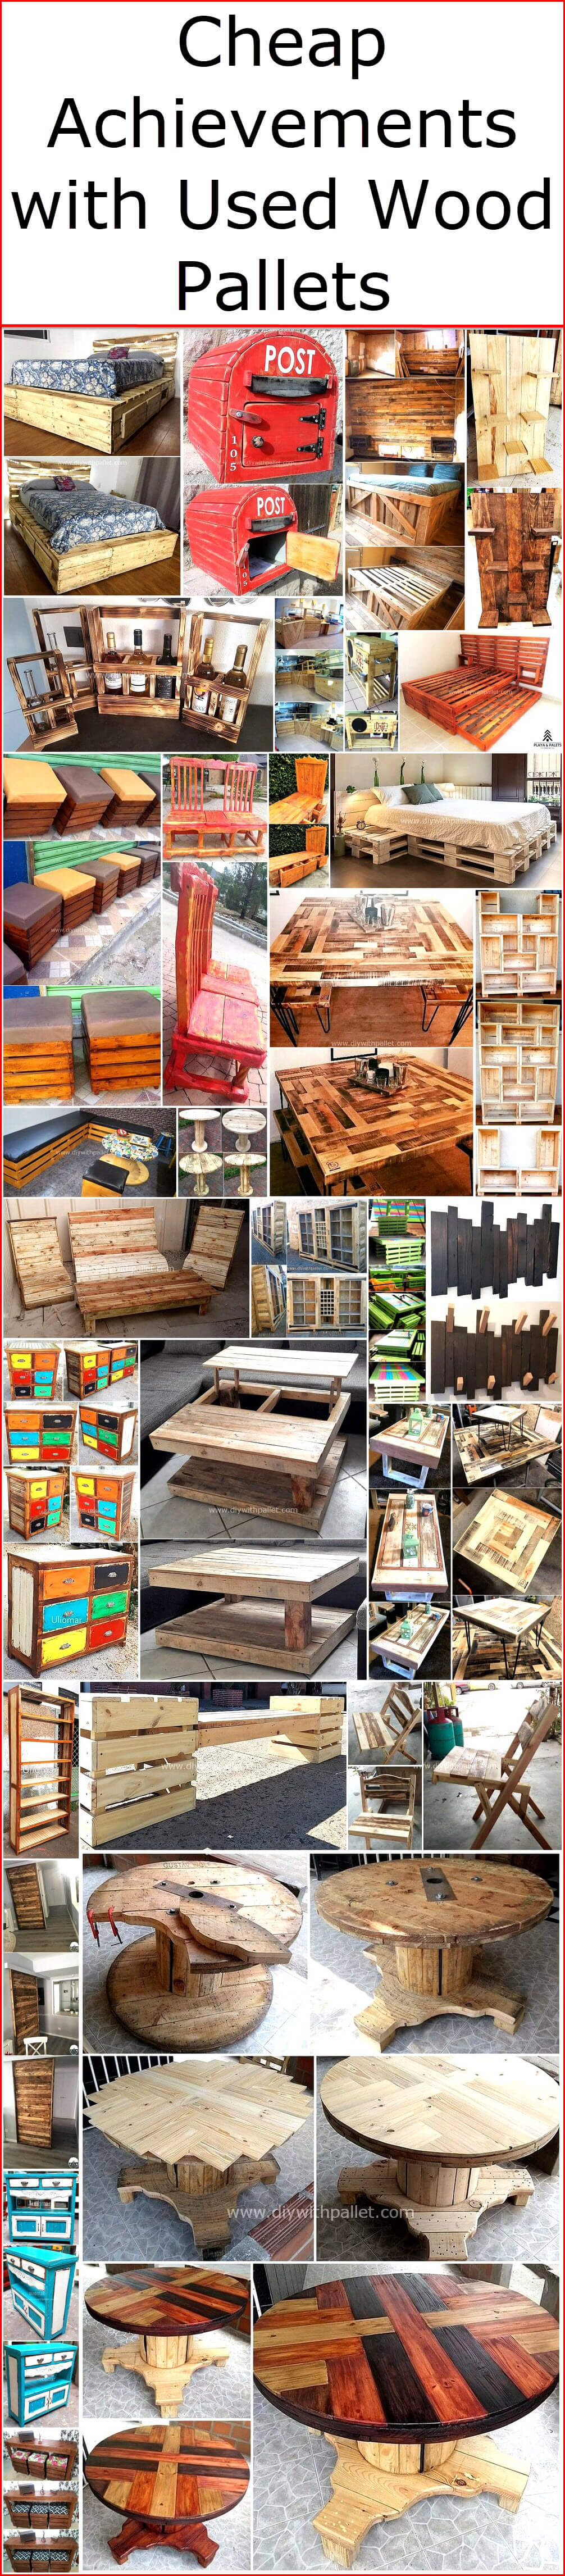 Cheap Achievements with Used Wood Pallets